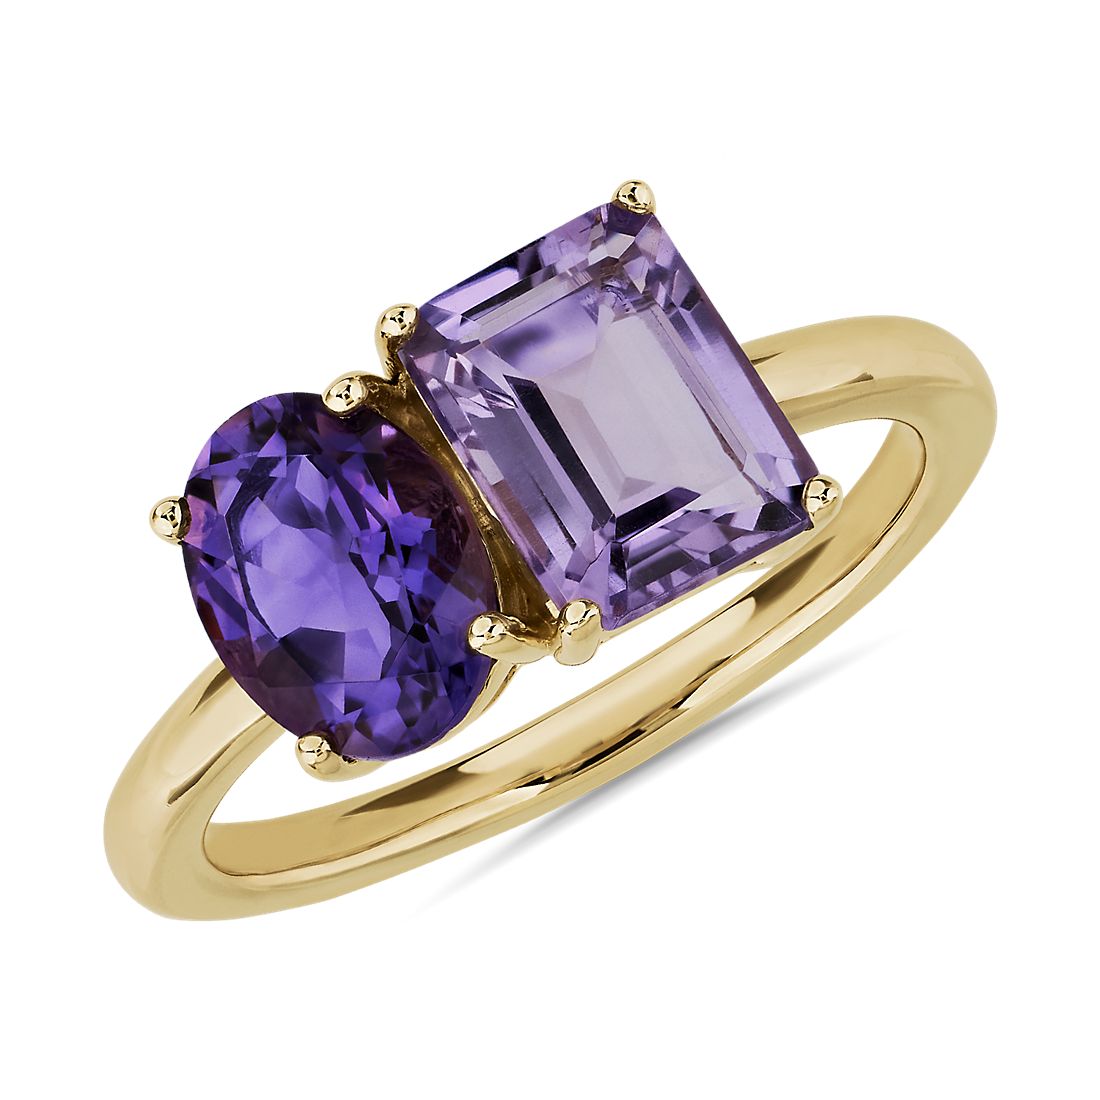 Amethyst Two Stone Ring in 14K Yellow Gold